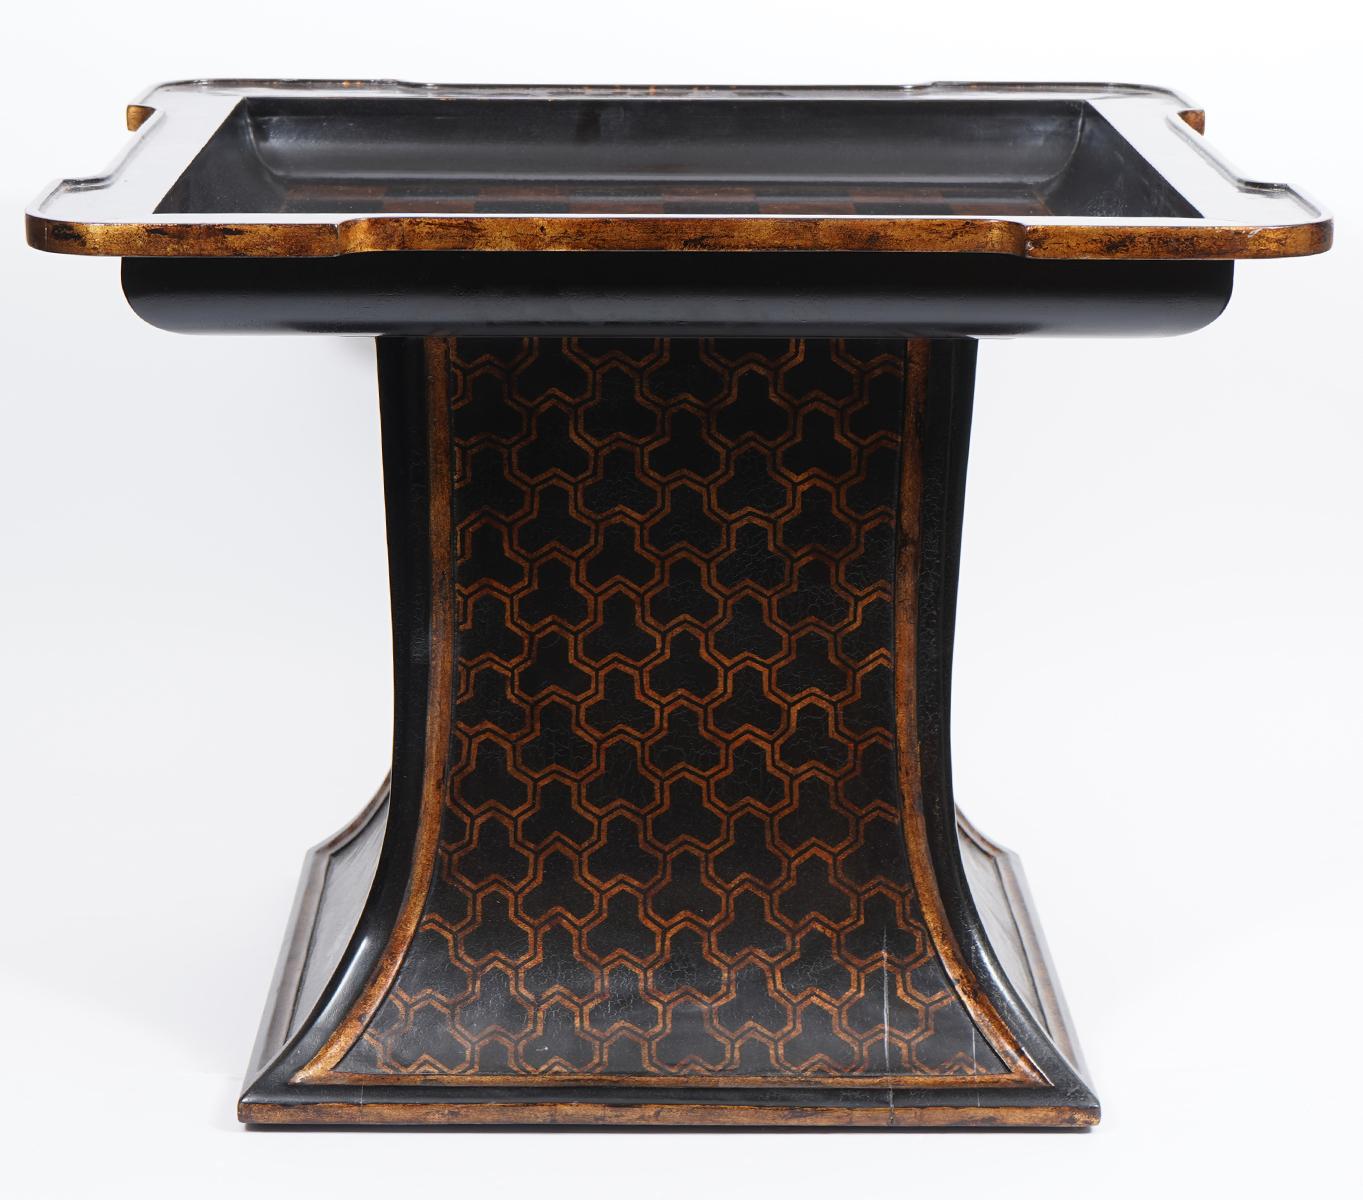 Ishizawa side table by Gregorius Pineo, Los Angeles. Has planked top with gilt detailed borders and raised edges, lacquered finish. Pedestal base has gilt Chinoiserie design. Checkerboard top with fitted glass top not shown but will be included.